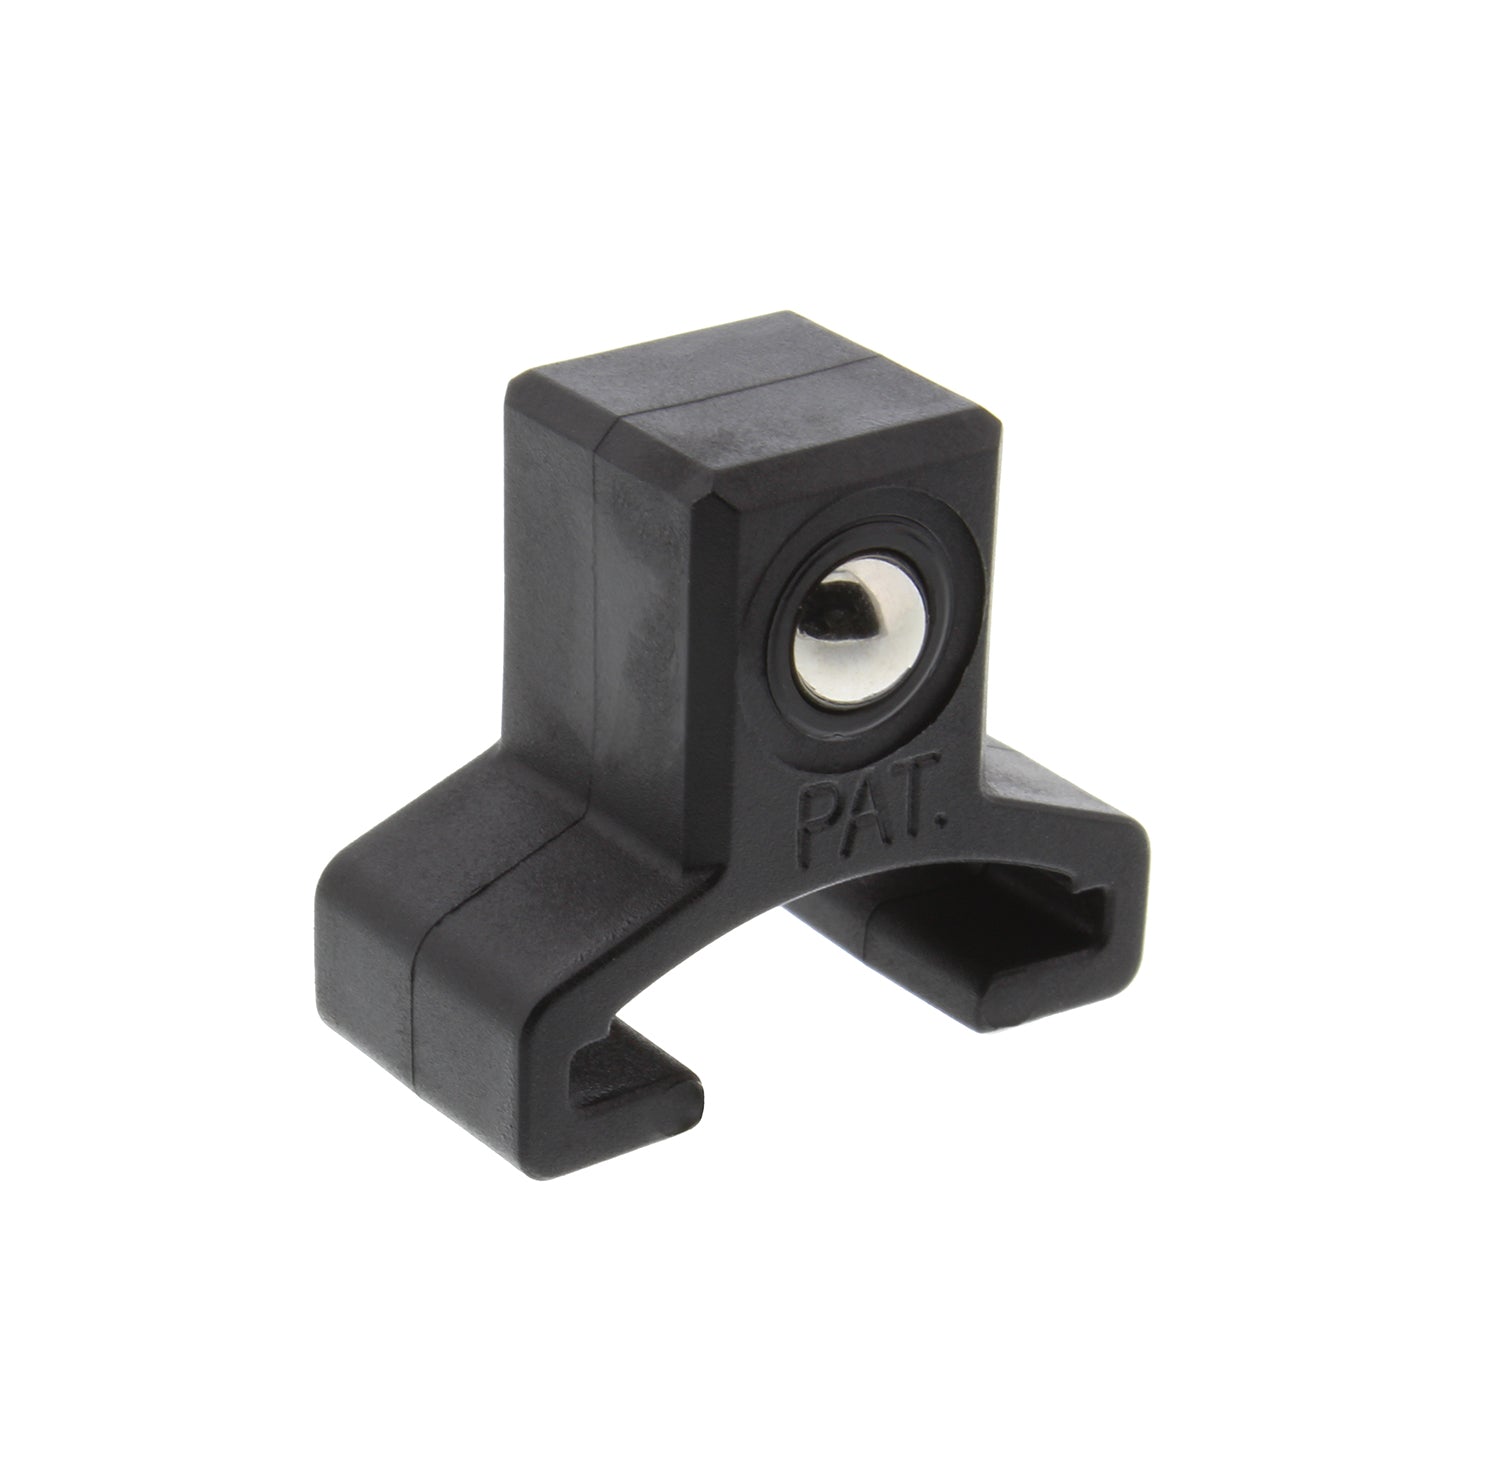 1/2" Inch Drive Replacement Socket Clip 10-Pack for Aluminum Rail